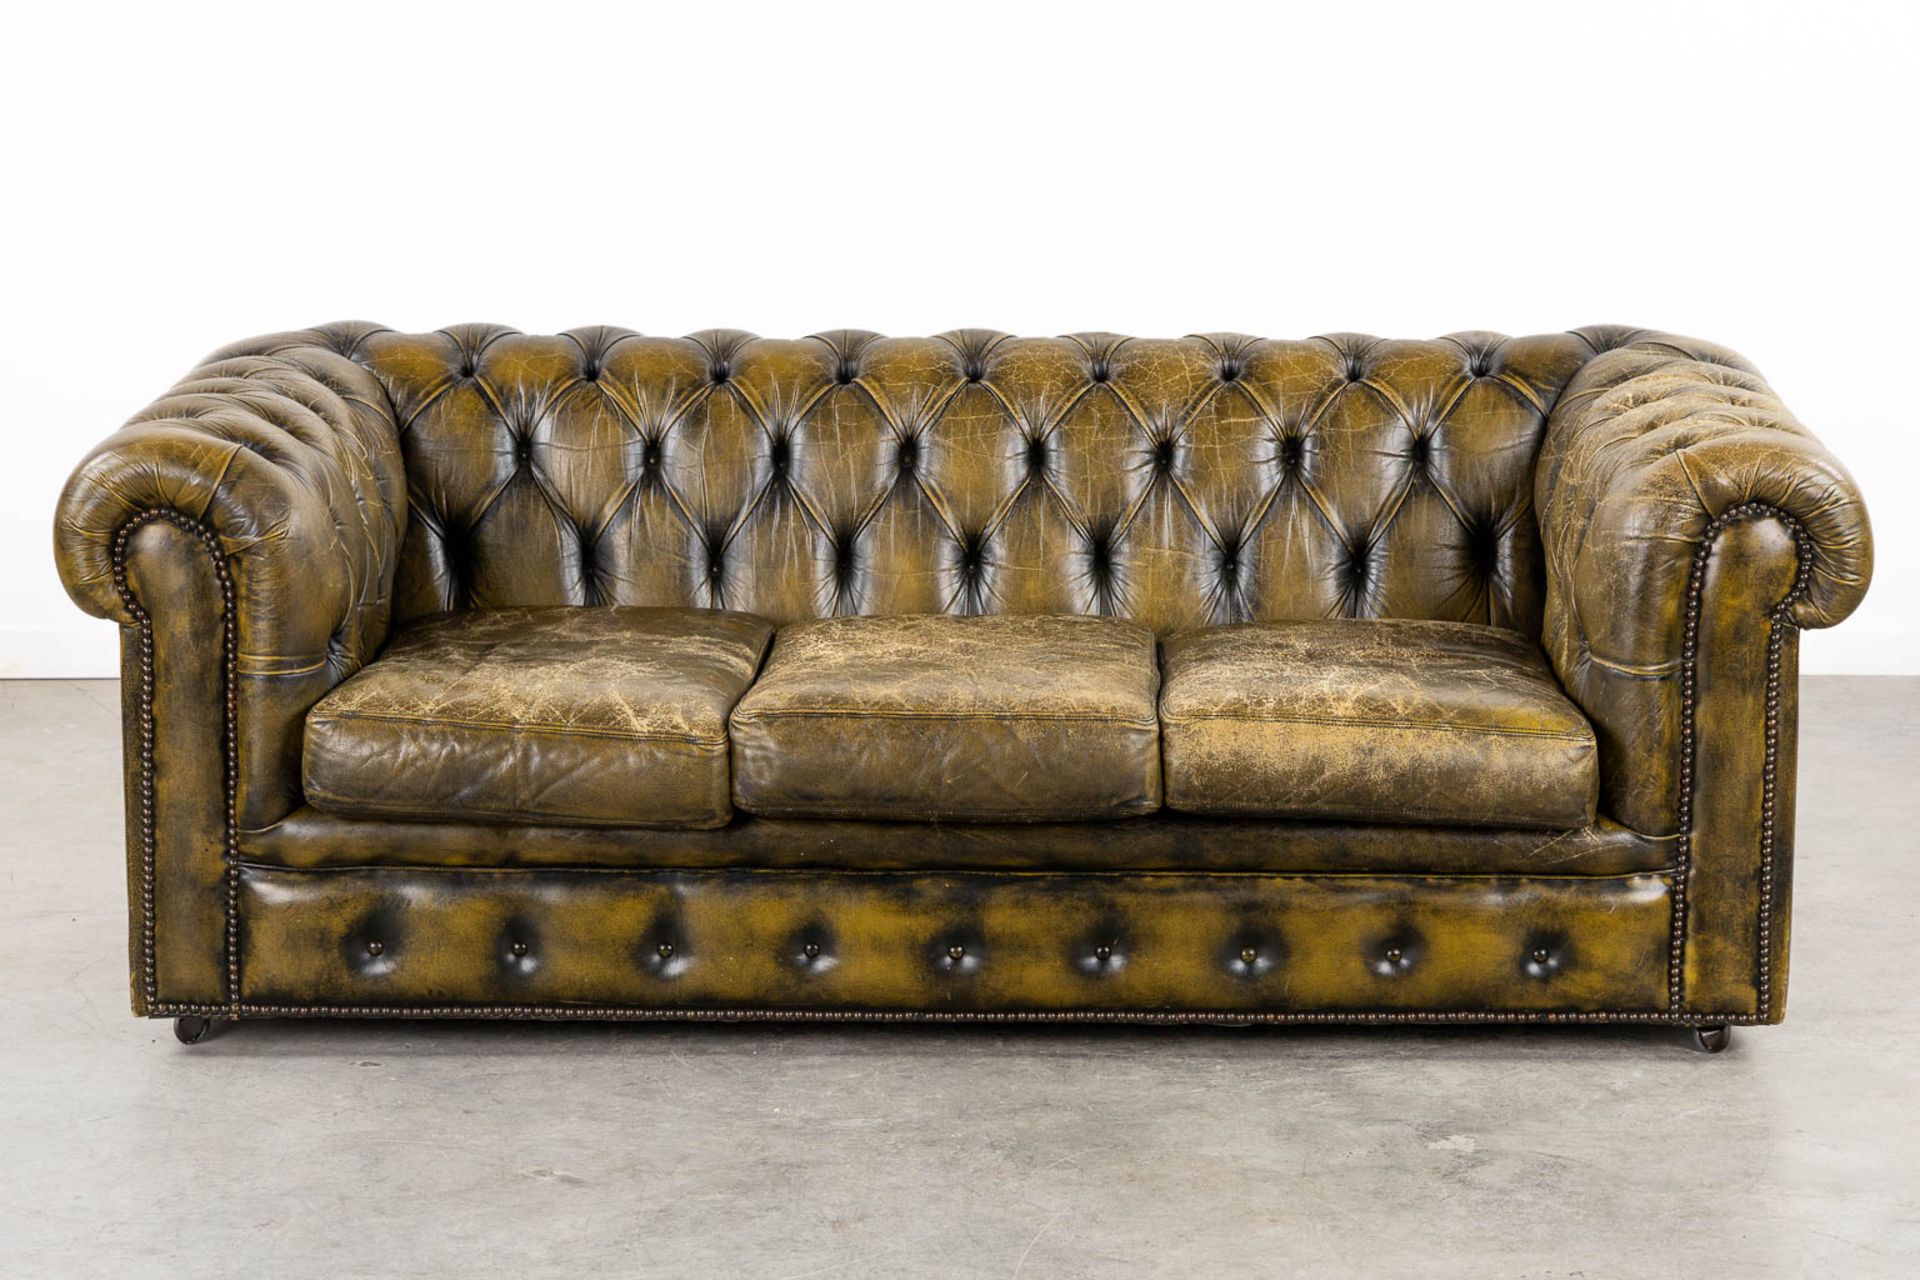 A Chesterfield three-person, green leather sofa. (L:90 x W:188 x H:68 cm) - Image 3 of 13